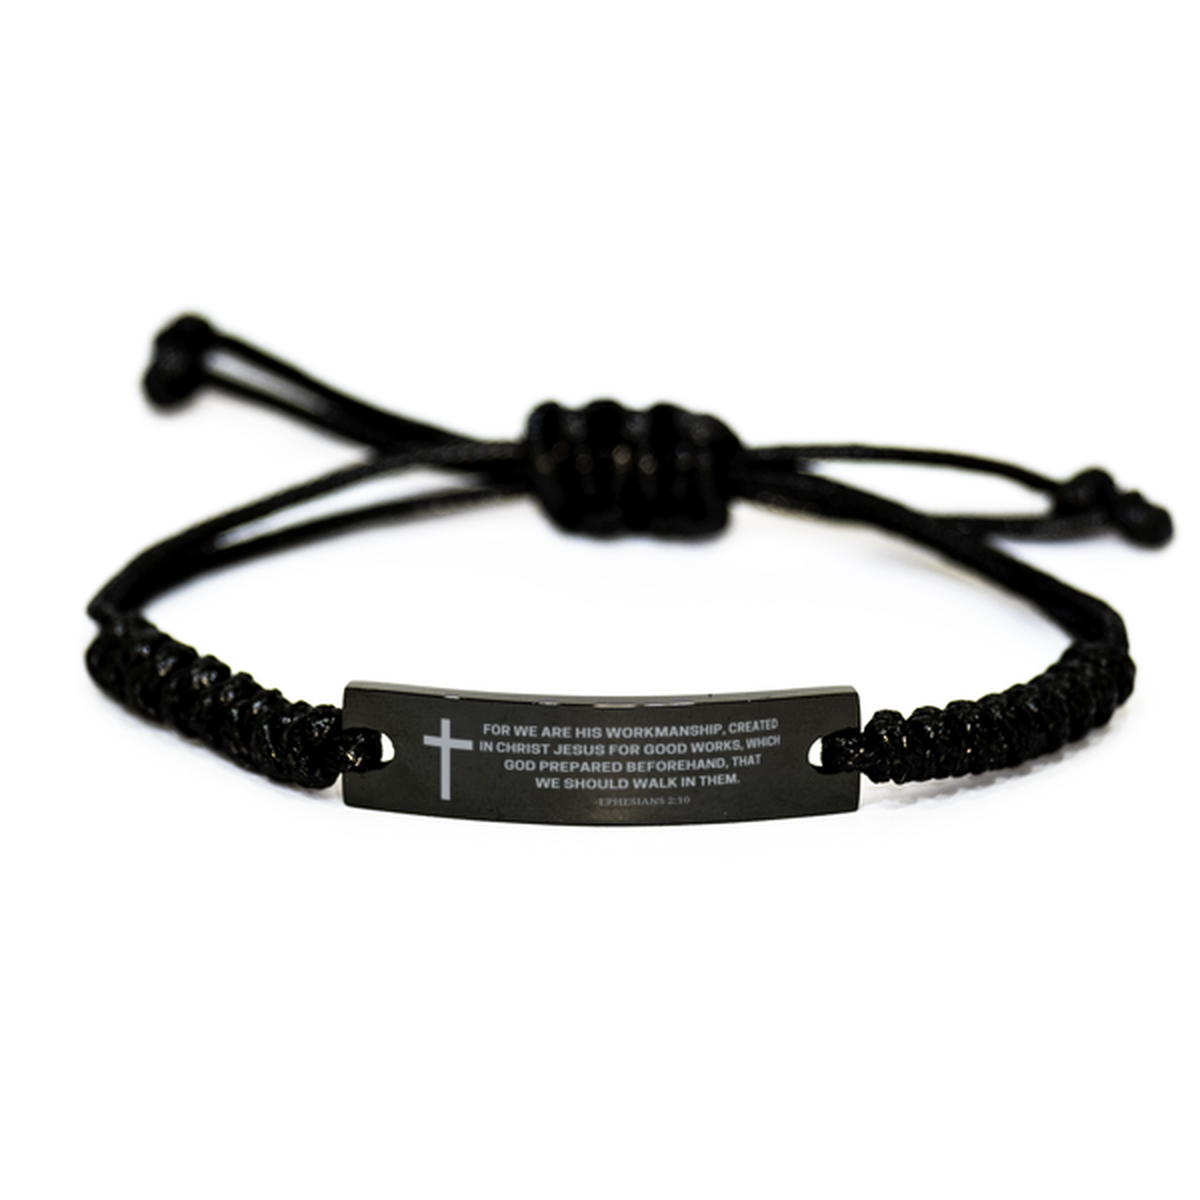 Baptism Gifts For Teenage Boys Girls, Christian Bible Verse Black Rope Bracelet, For we are His workmanship, Catholic Confirmation Gifts for Son, Godson, Grandson, Nephew